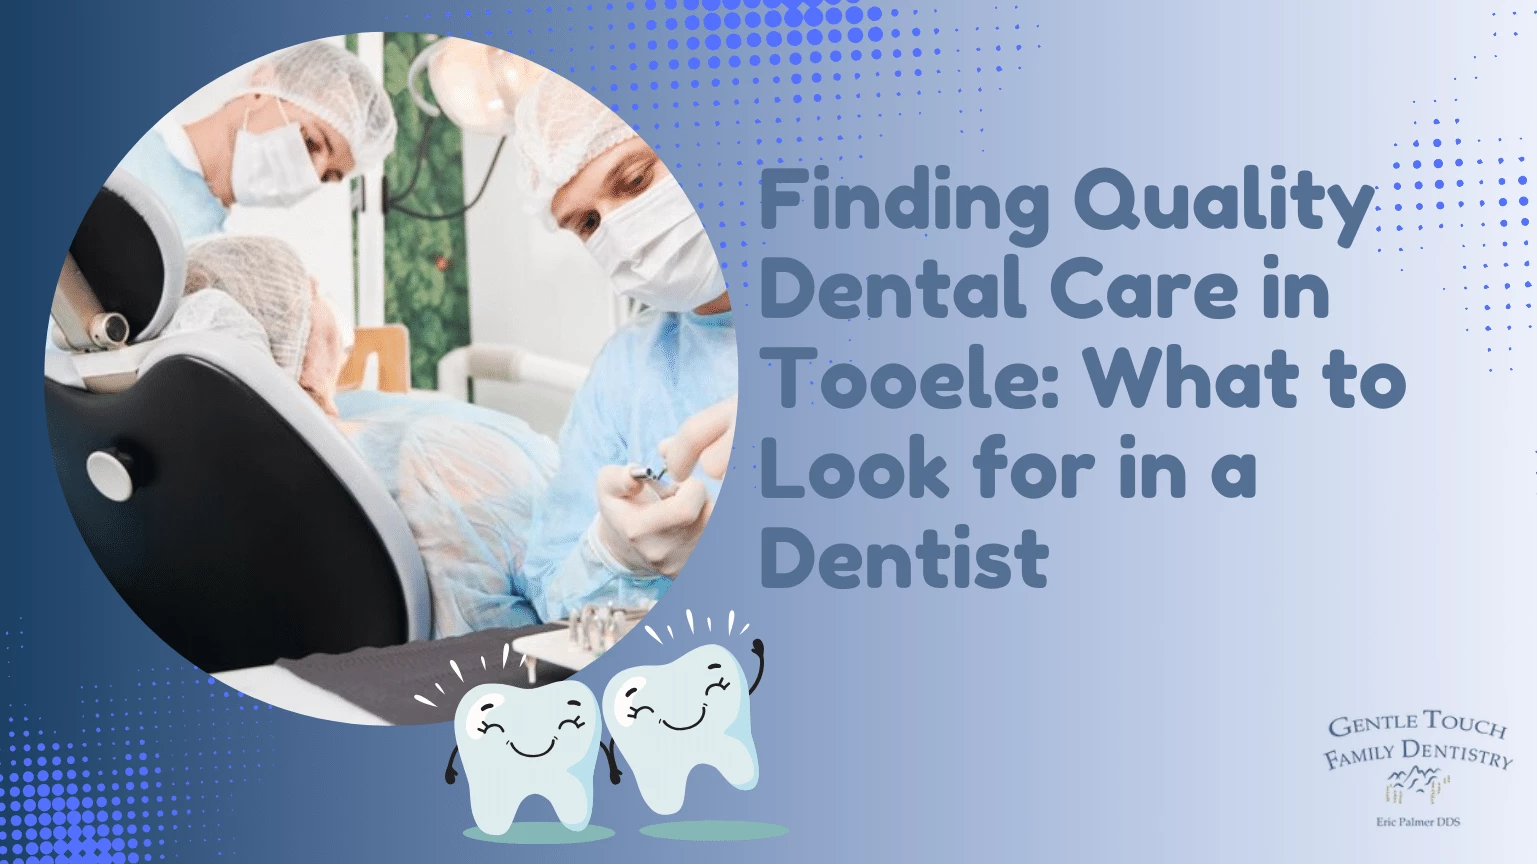 Finding Quality Dental Care in Tooele What to Look for in a Dentist